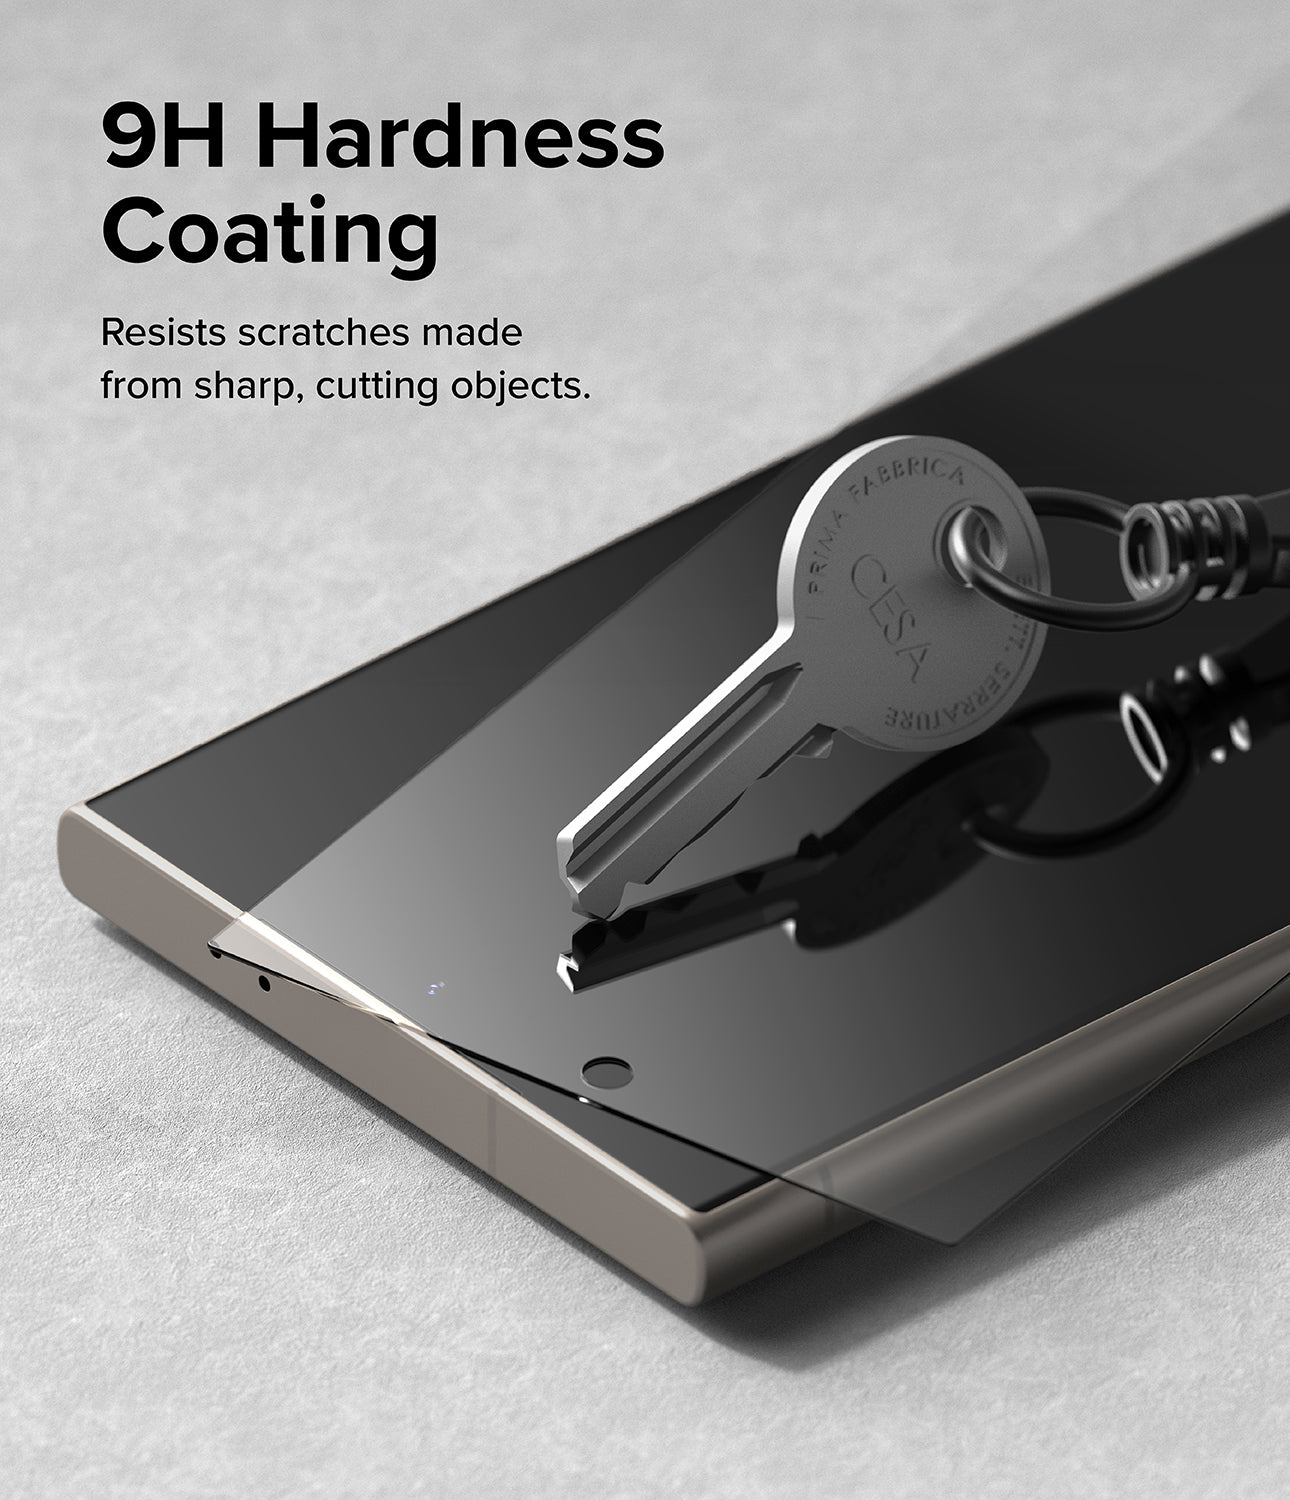 Galaxy S24 Ultra Screen Protector | Easy Slide Tempered Glass - 9H Hardness Coating. Resists scratches made from sharp, cutting objects.